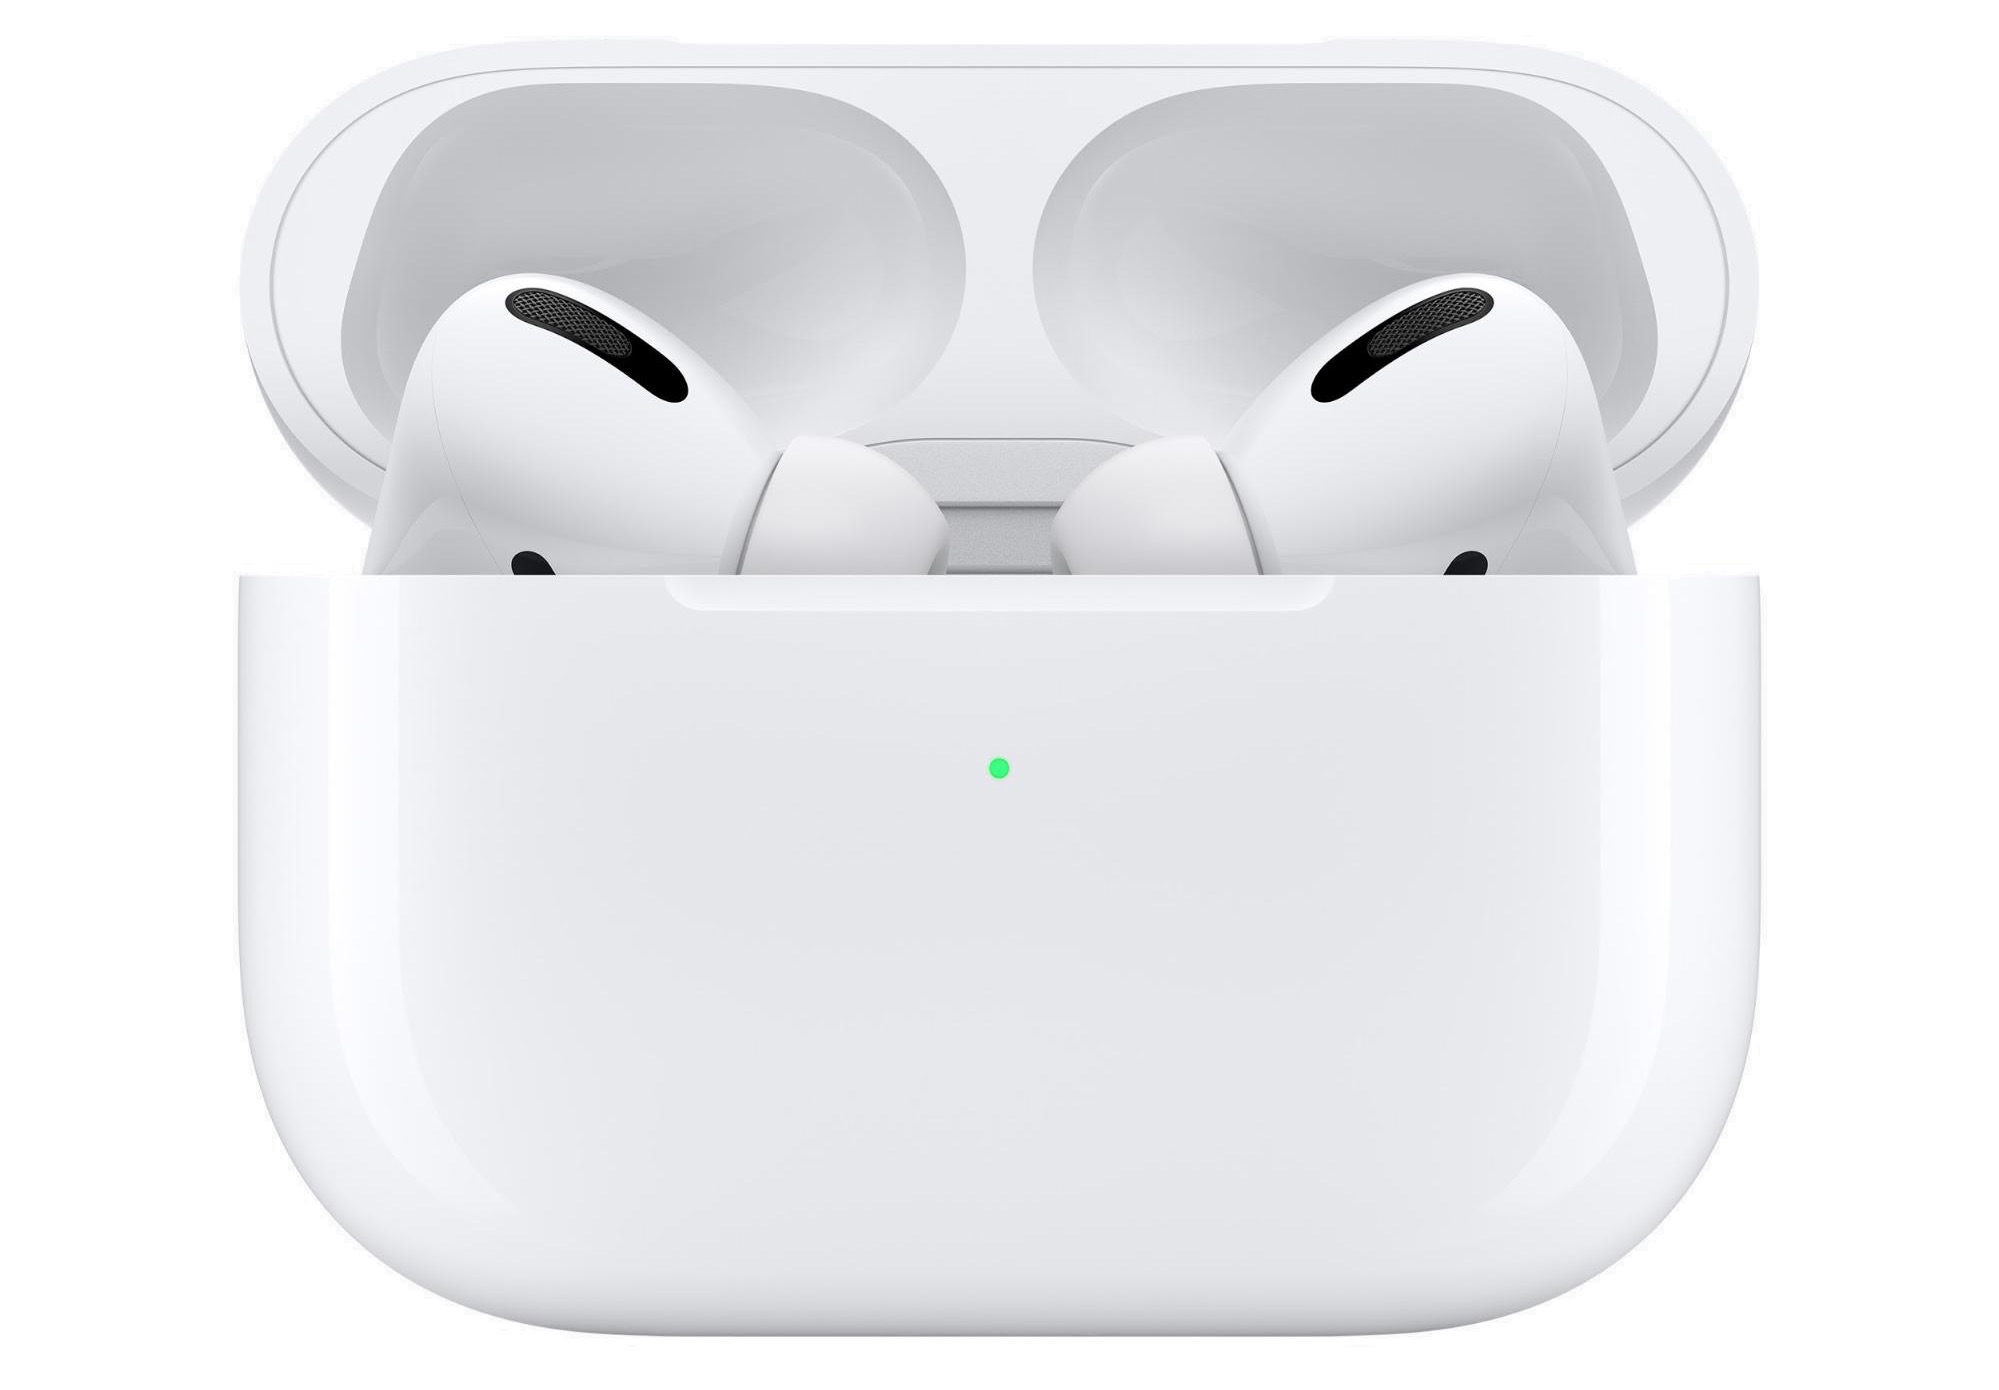 Apple Updates Firmware for AirPods Pro and Second-Generation AirPods